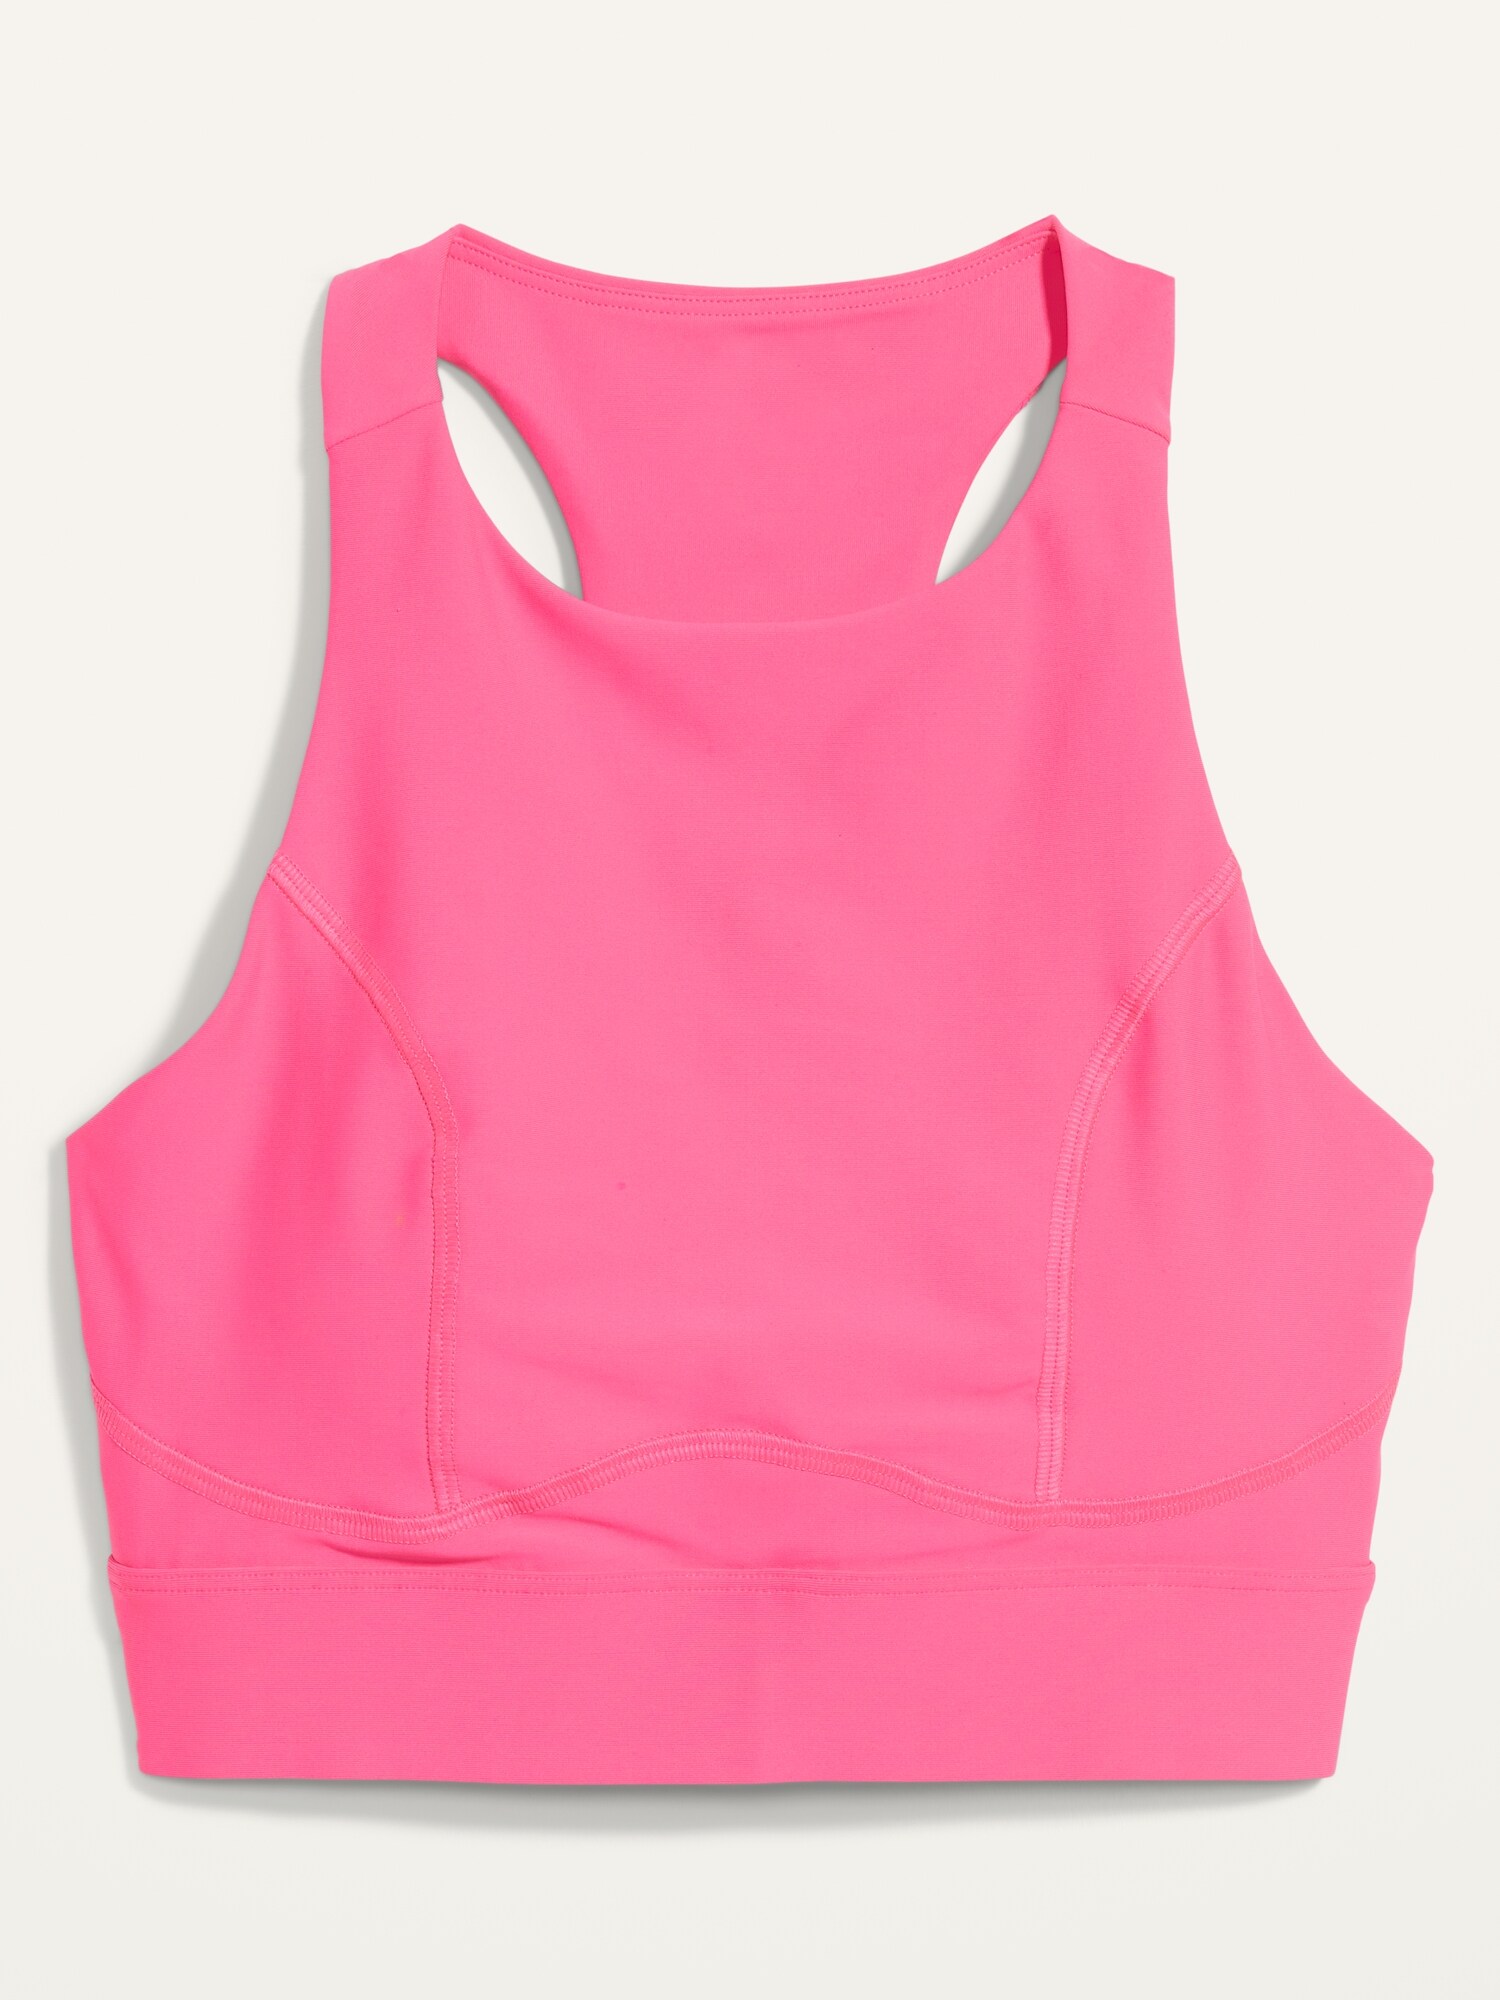 Old Navy Active Power Soft Girls Large 10/12 Sports Bra Pink